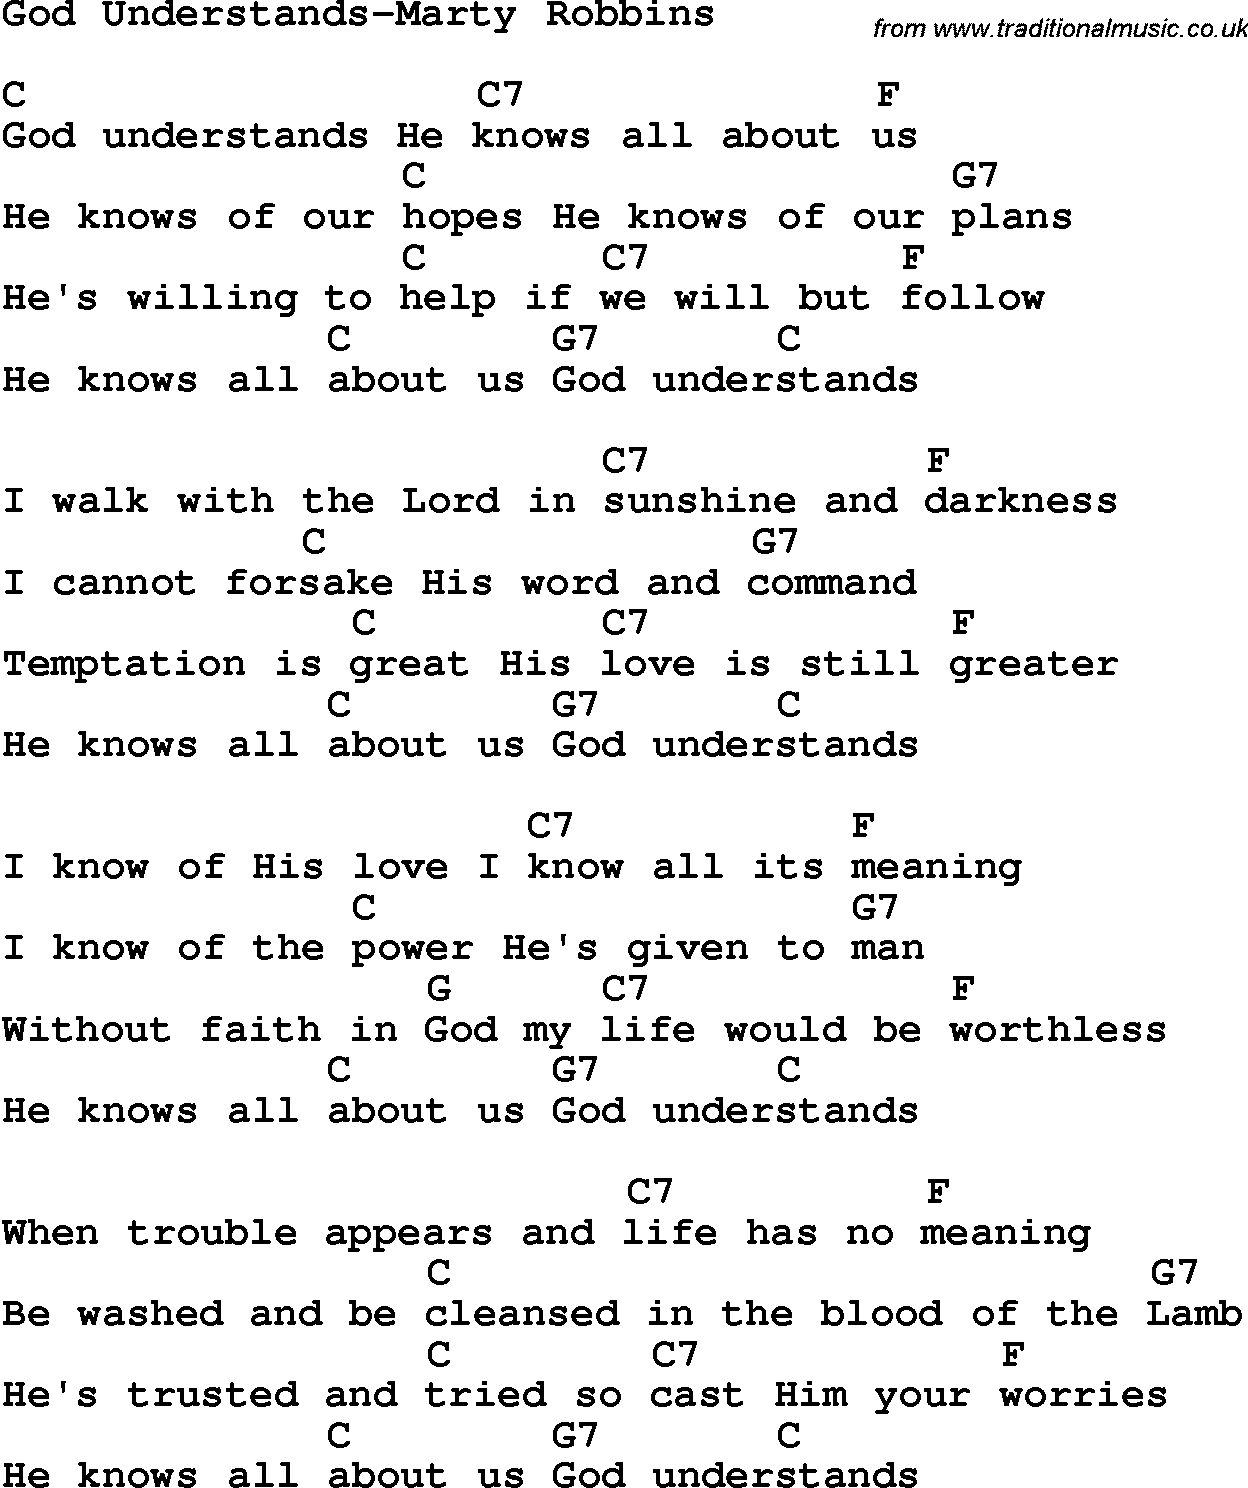 Country, Southern and Bluegrass Gospel Song God Understands-Marty Robbins lyrics and chords